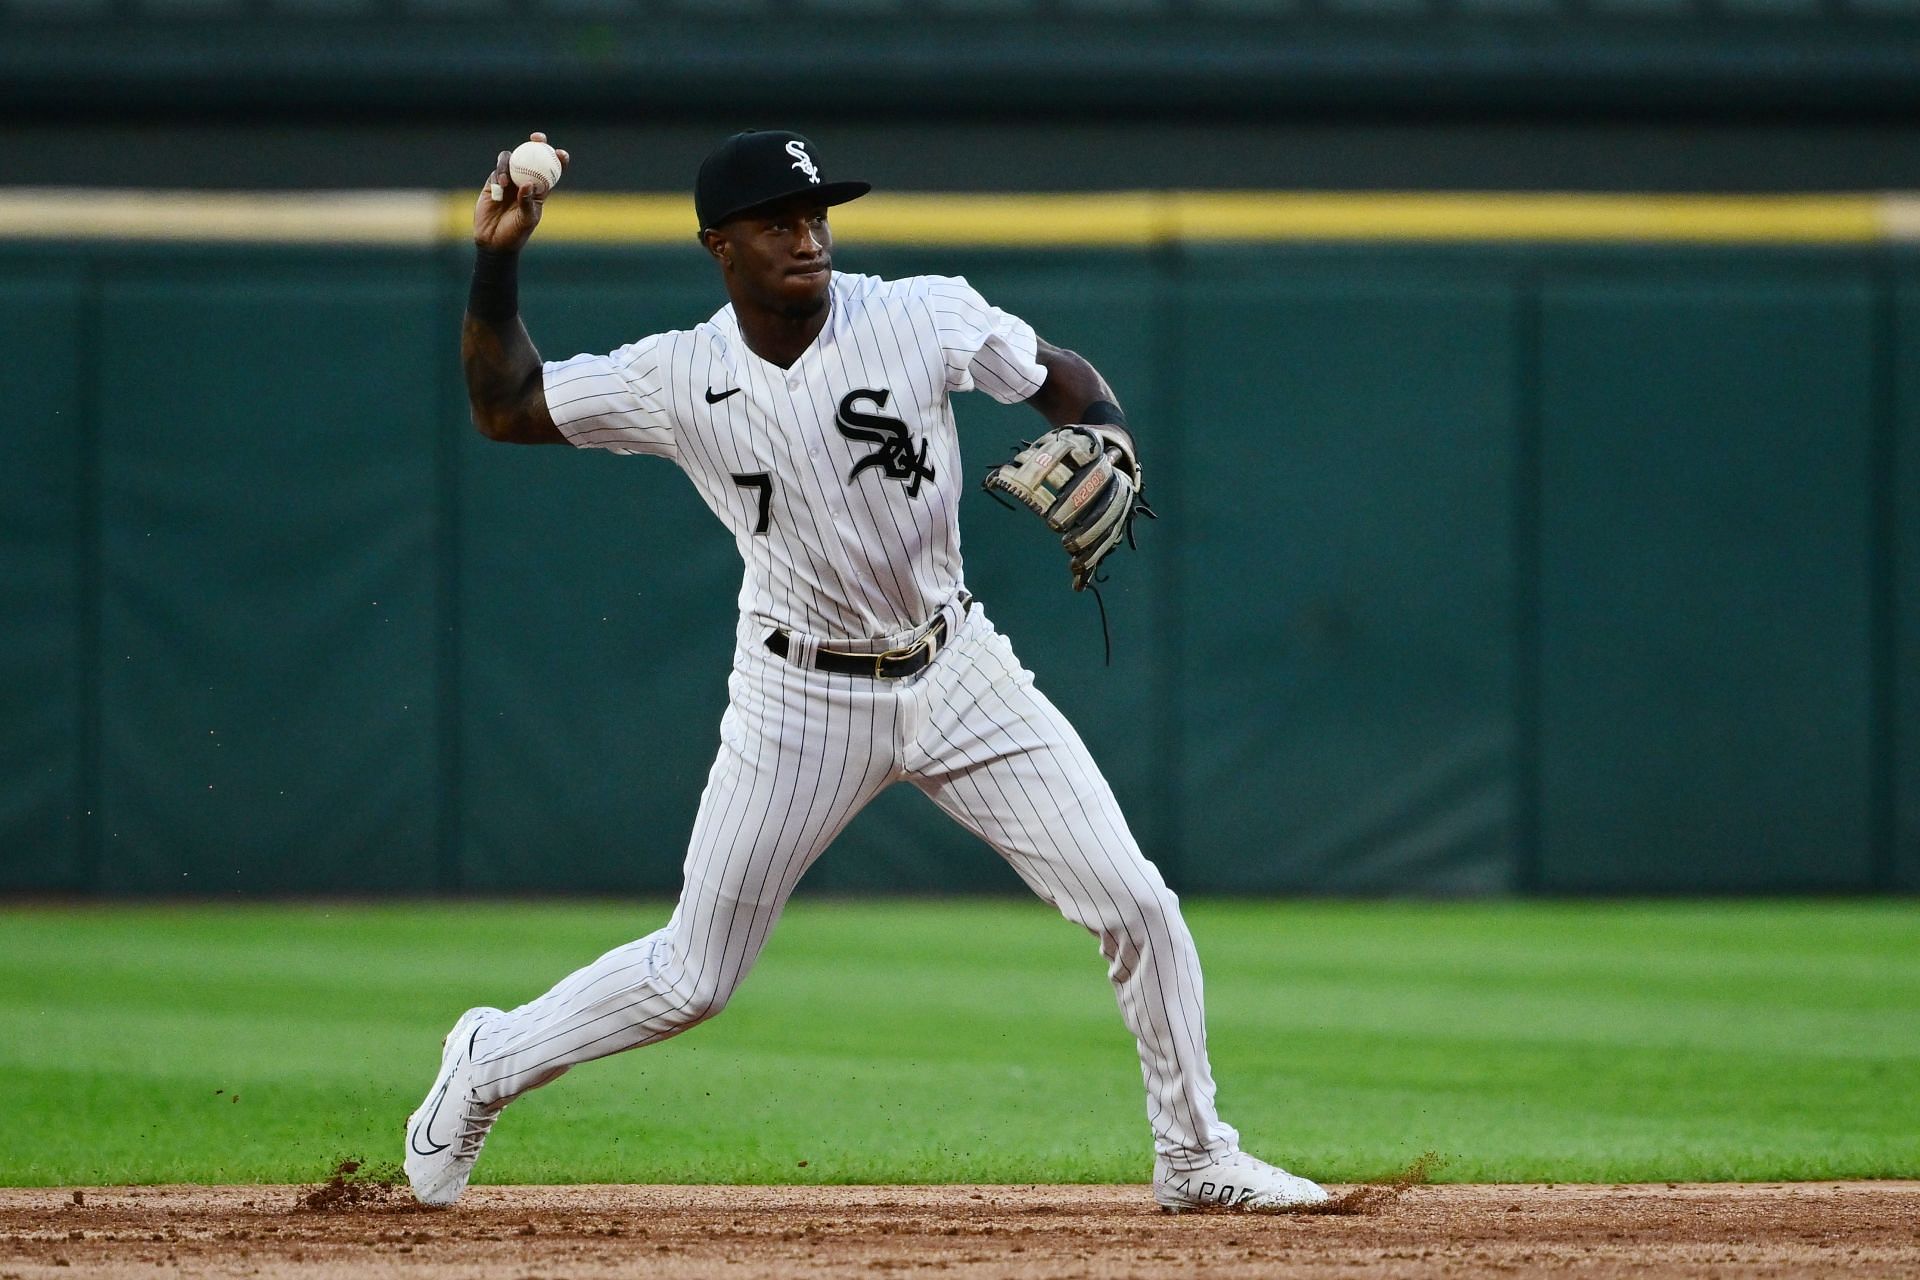 Chicago White Sox shortstop Tim Anderson appeared to be in quite a bit of pain this afternoon